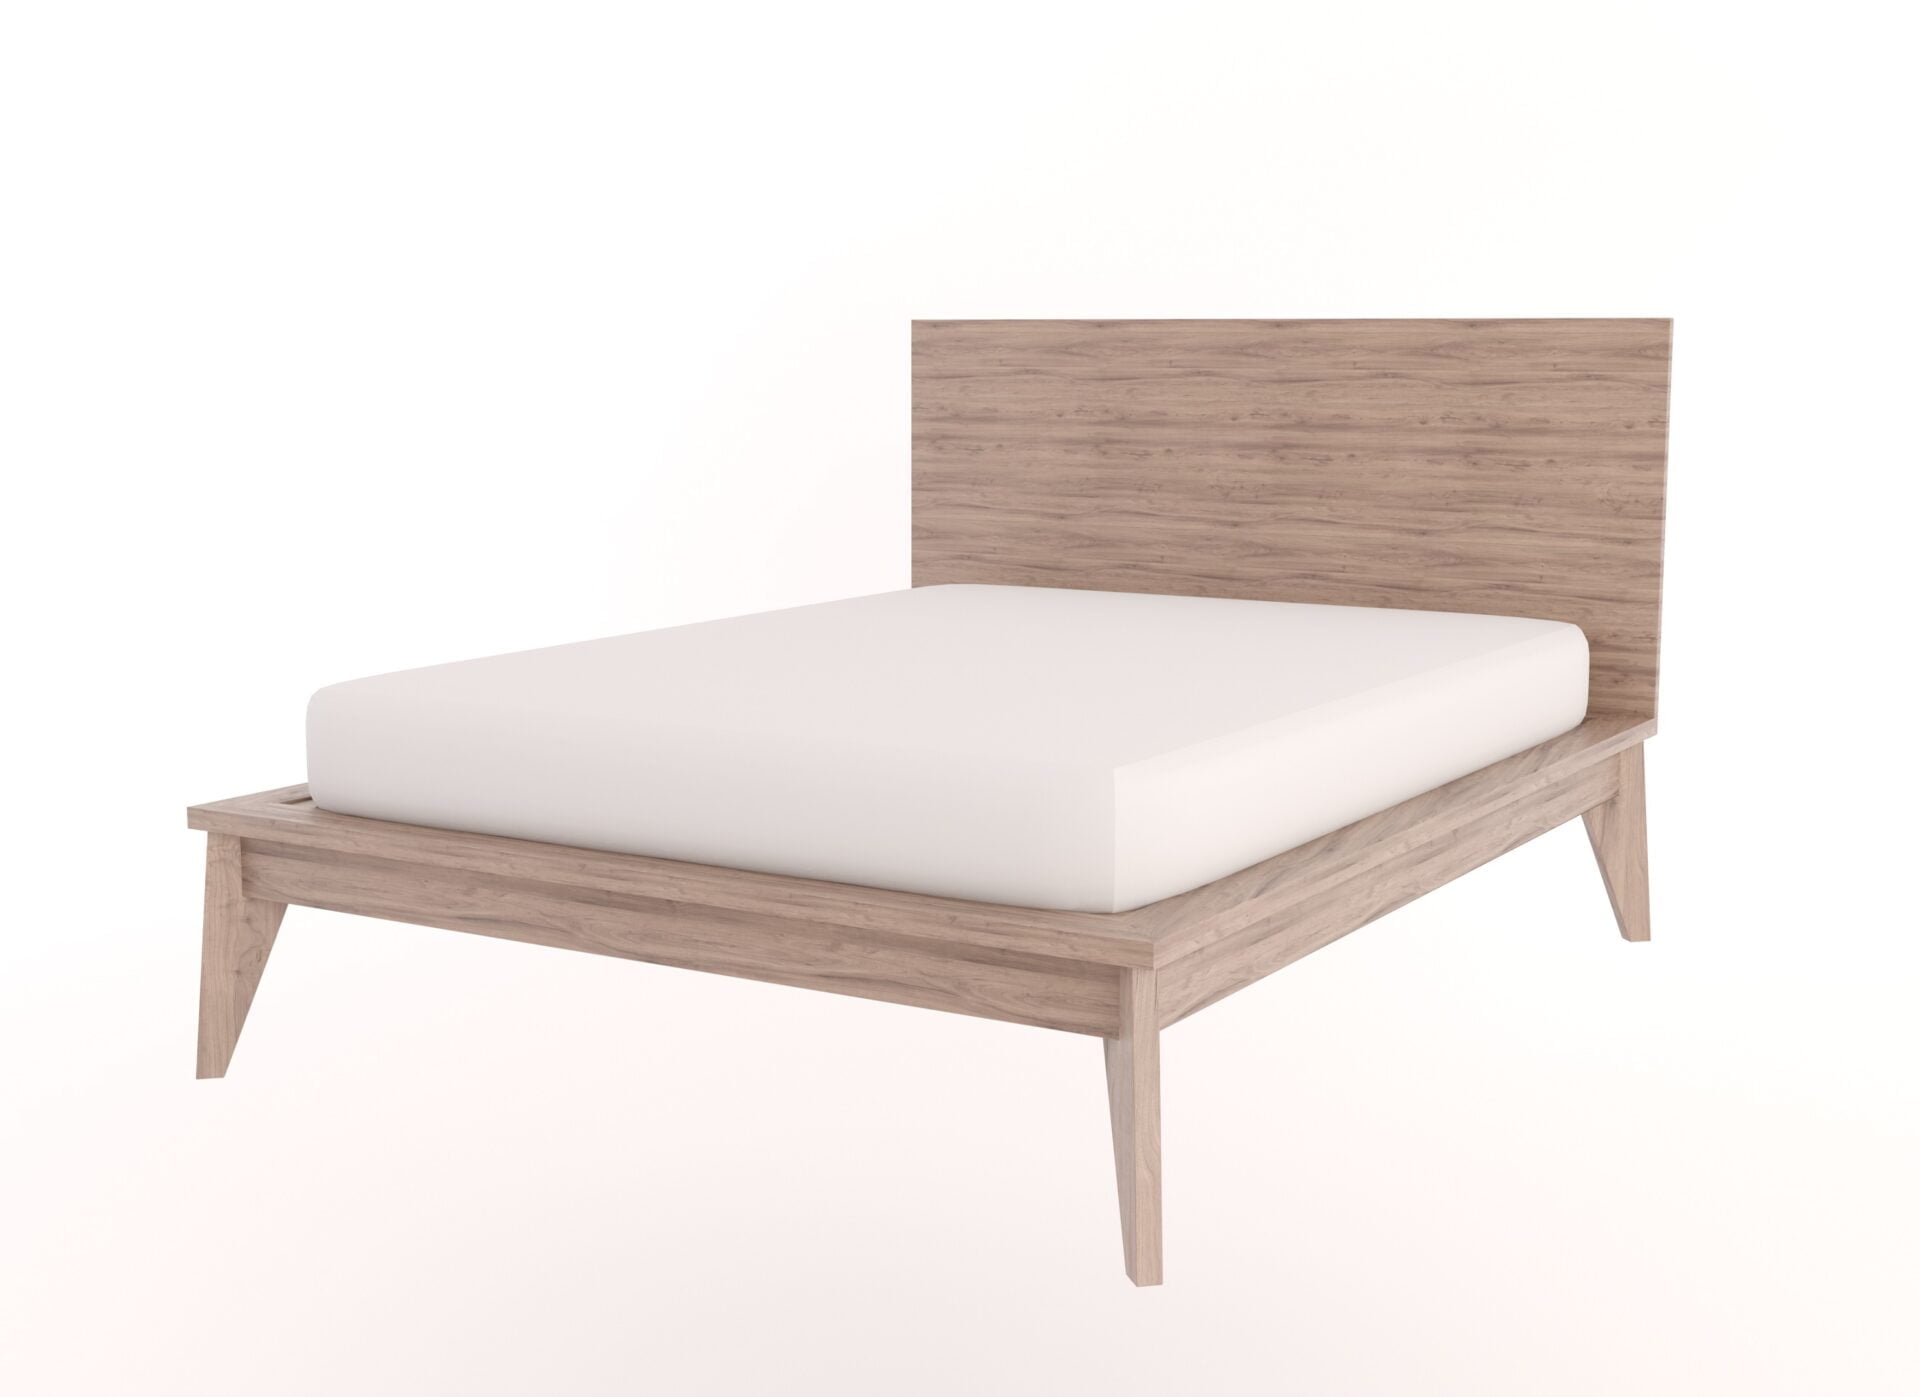 Cooper Bed With Headboard Double Size, What Size Bolts For Wooden Bed Frame